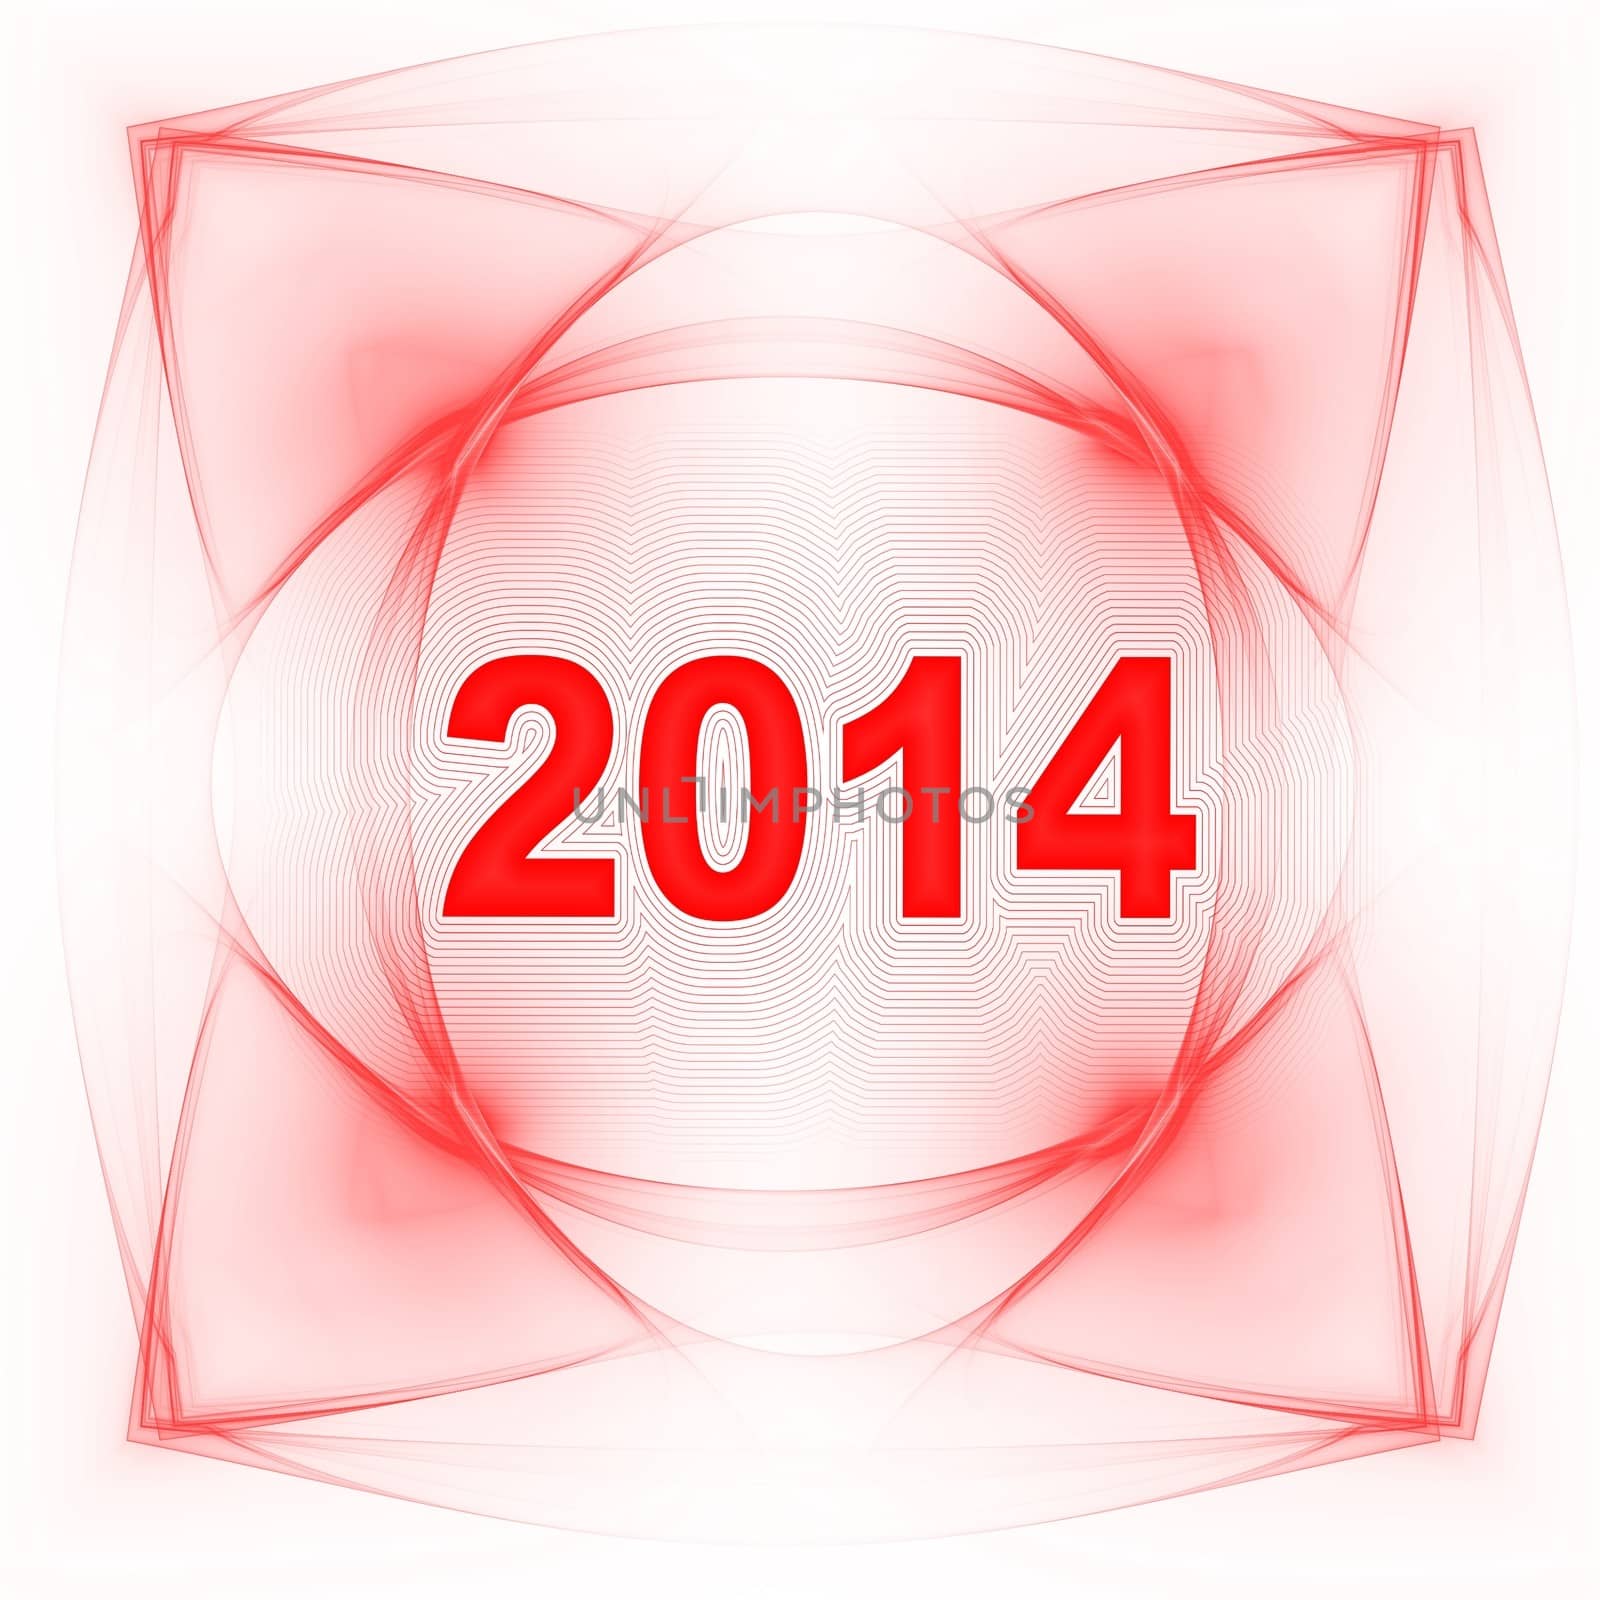  design of year 2014 with abstract background in pink color